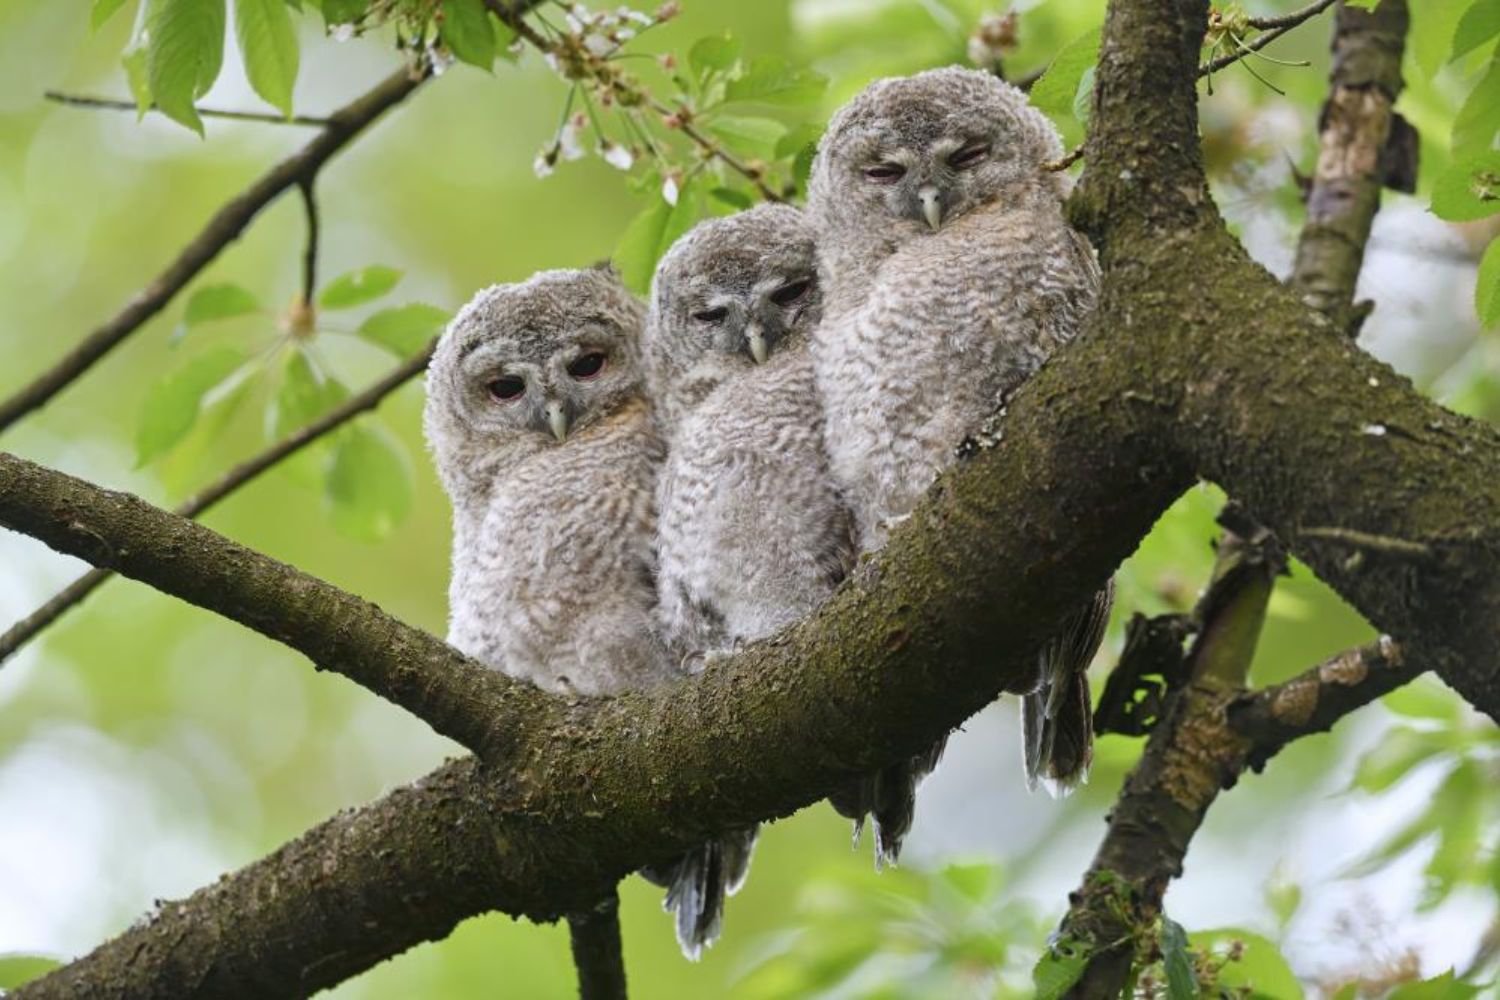 Triplet owls on the tree branch